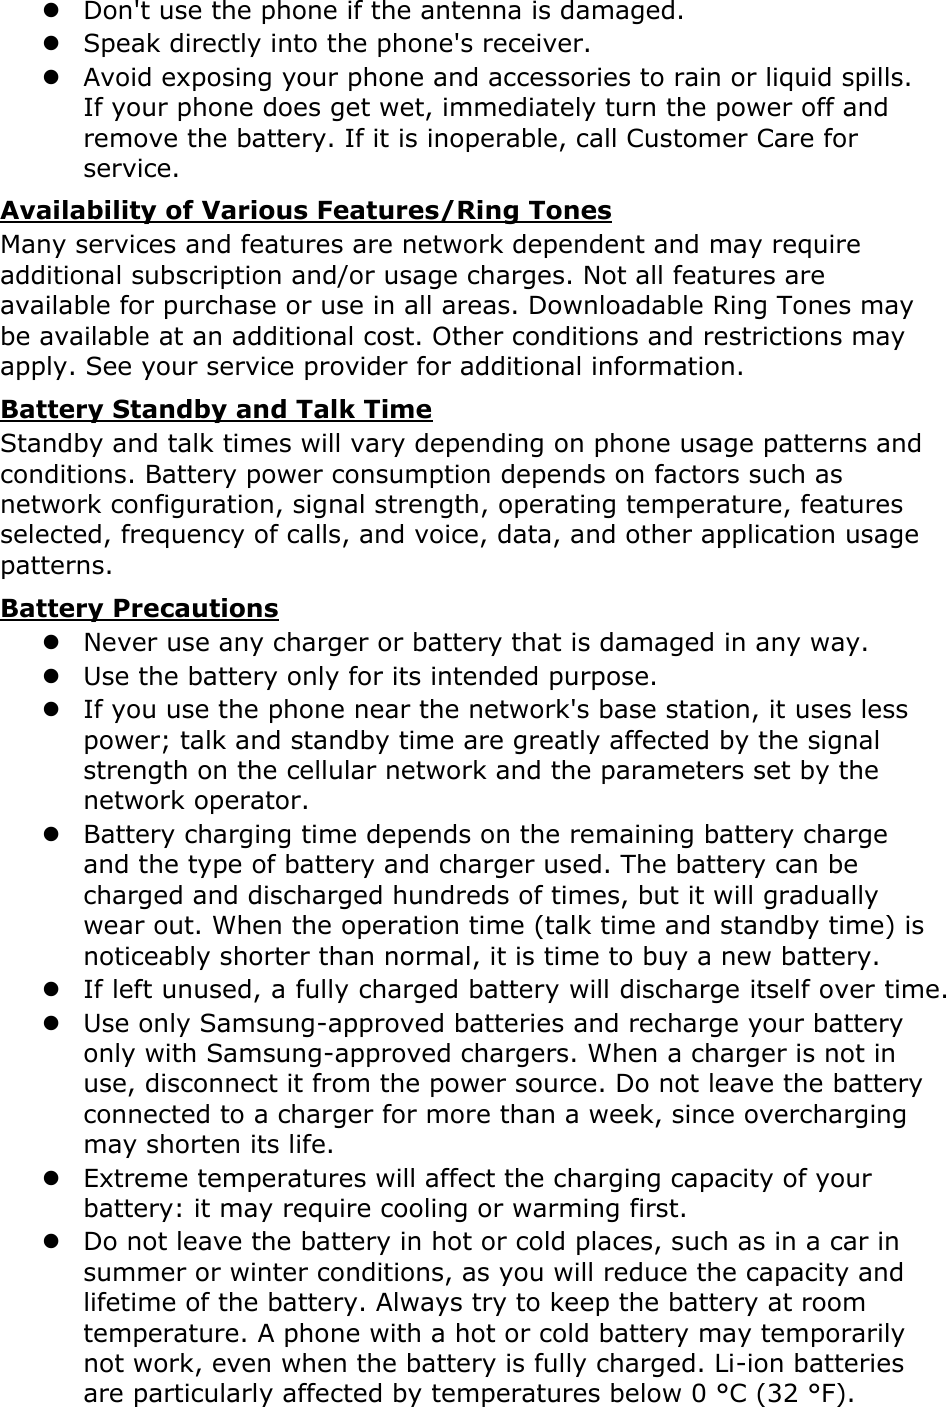 Page 19 of Samsung Electronics Co SCHI405U Portable Handset with Multi-band CDMA/LTE, WLAN and Bluetooth User Manual